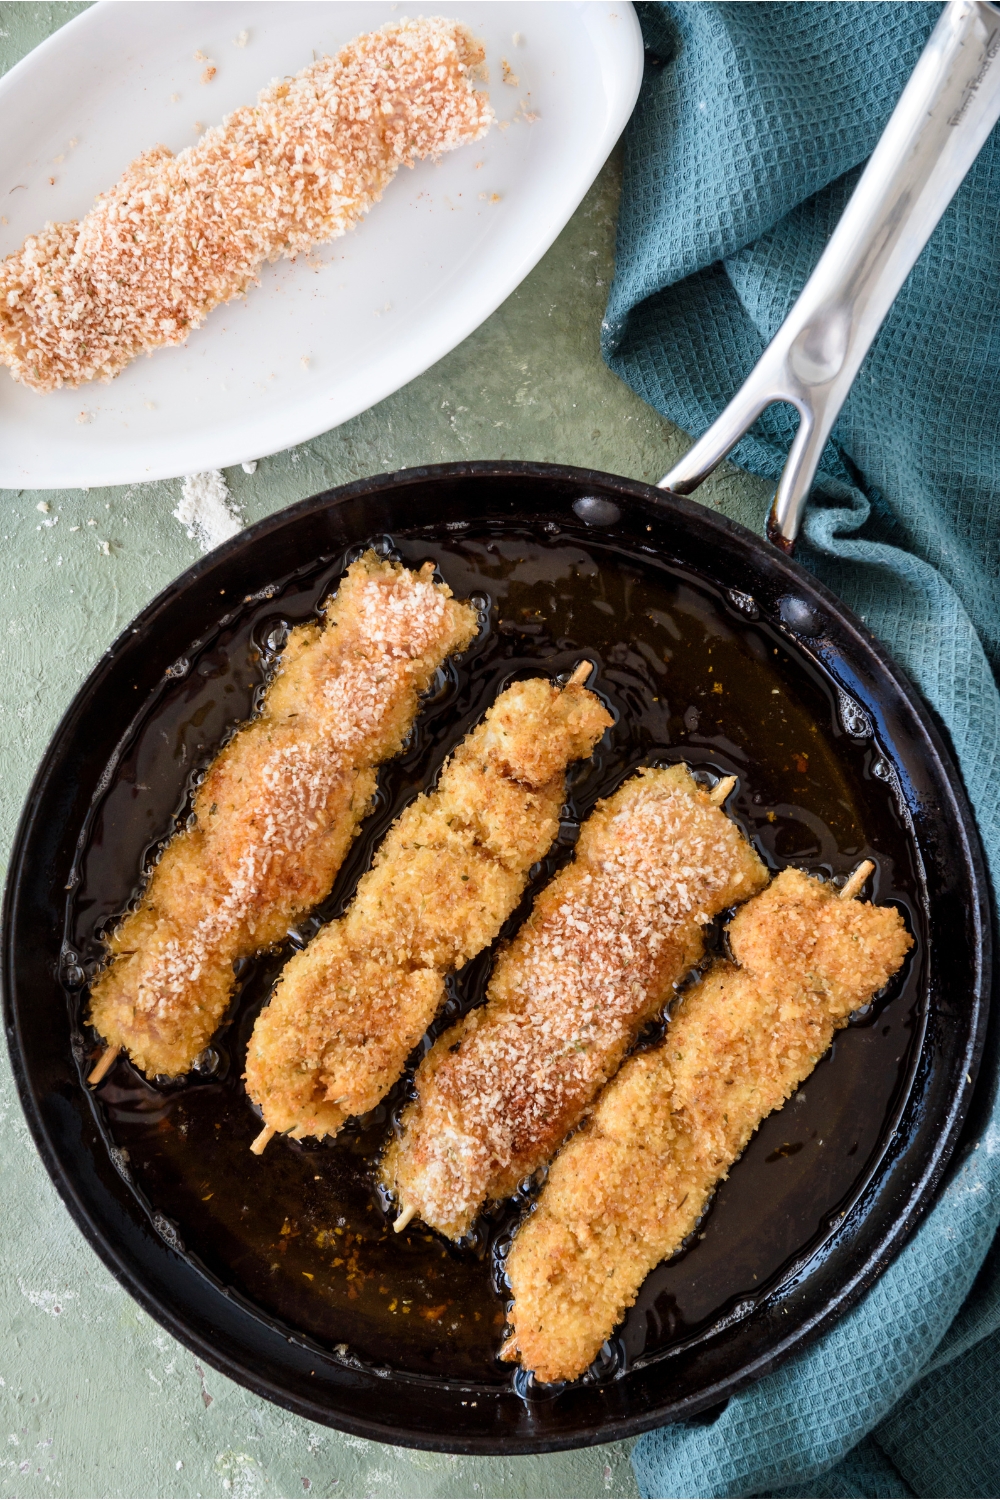 A pan filled with oil and four breaded chicken skewers frying in it.